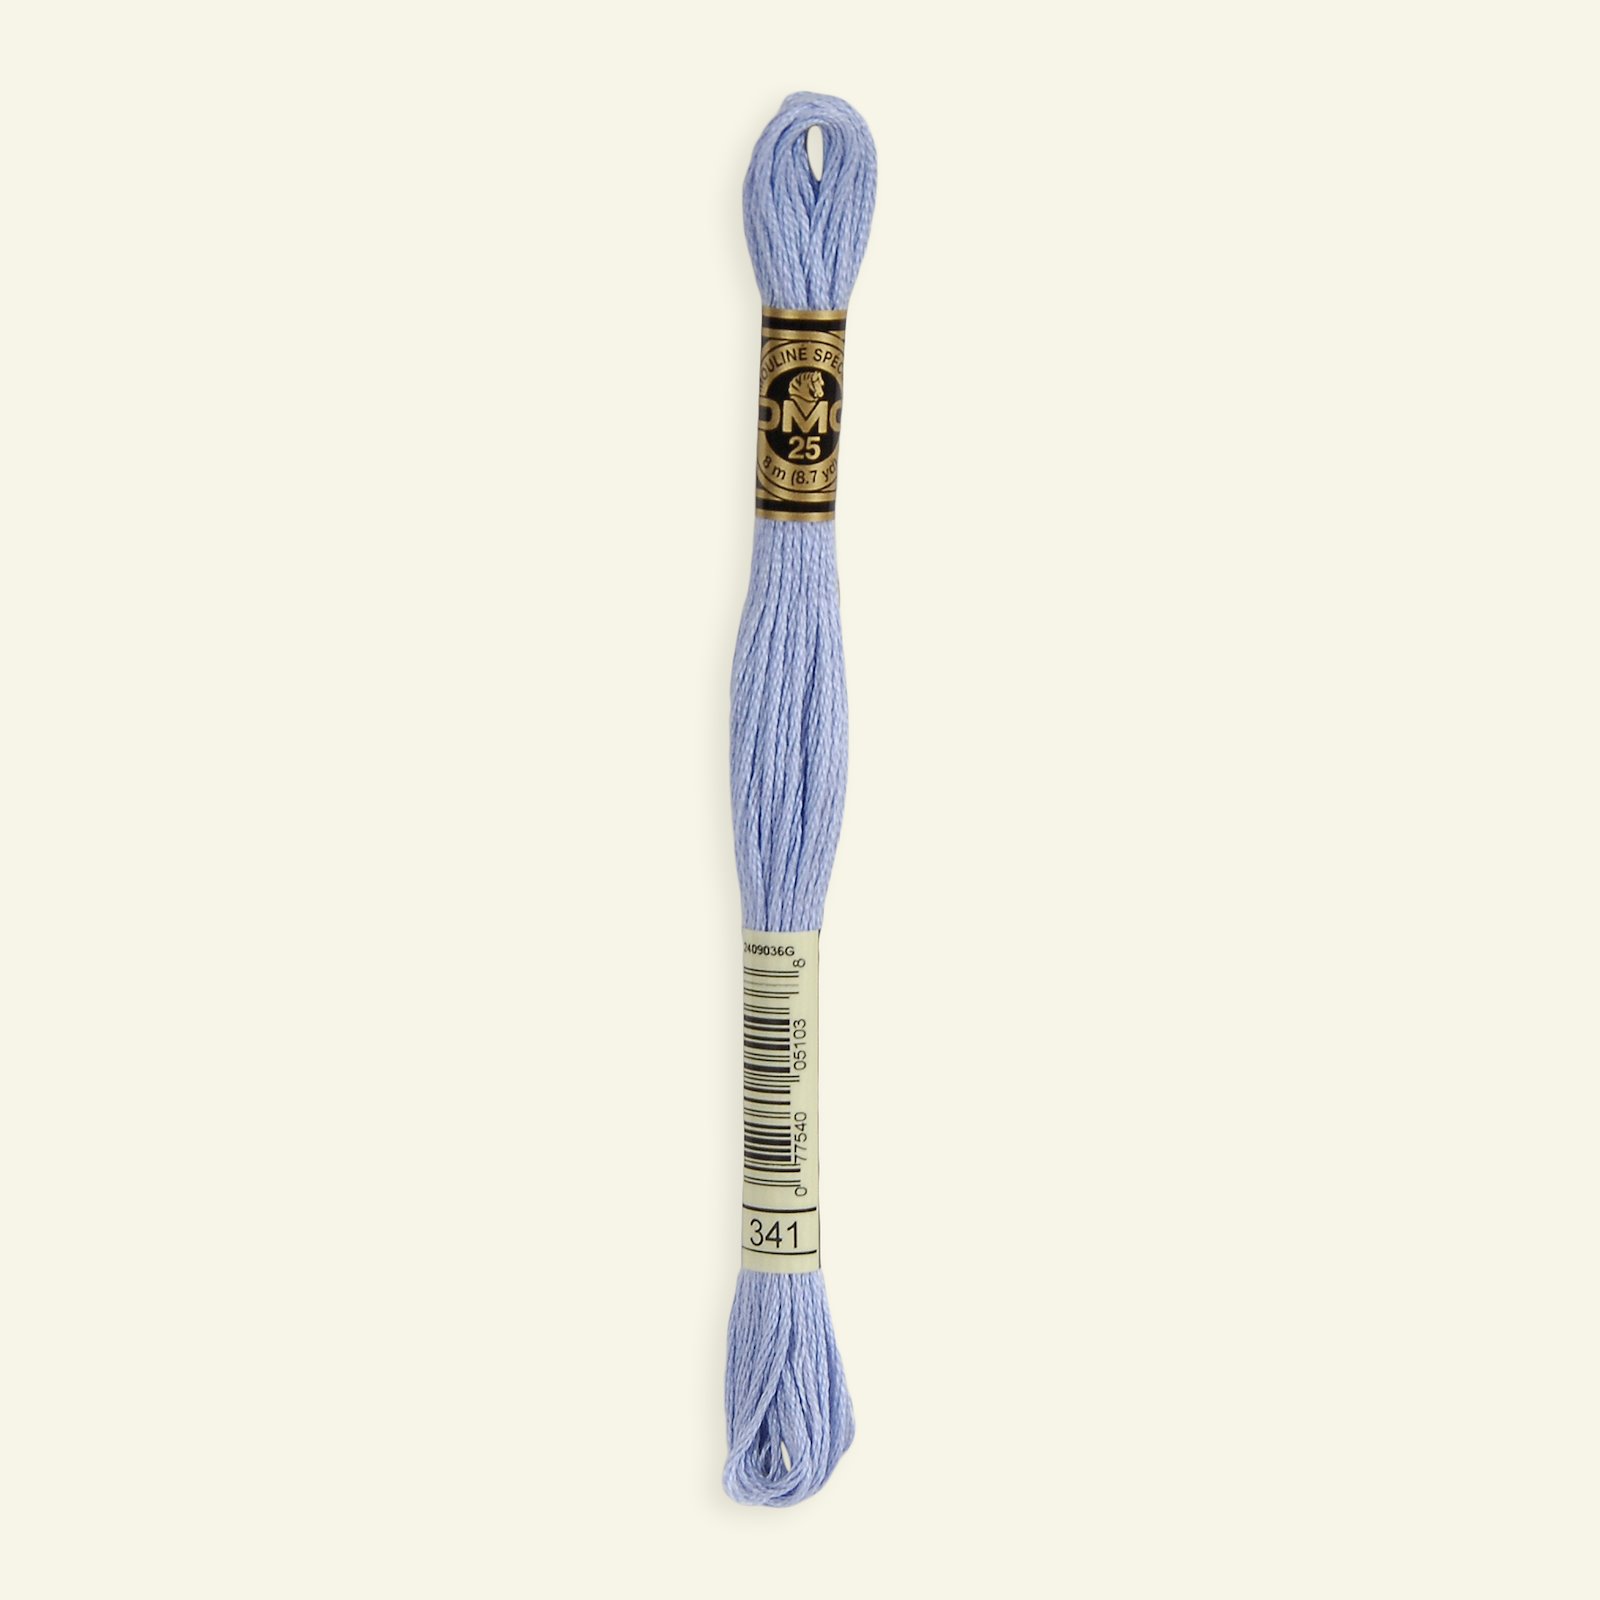 The Urban Store Embroidery Thread Light Blue Violet DMC 341 RRP 1.40 CLEARANCE XL 99p